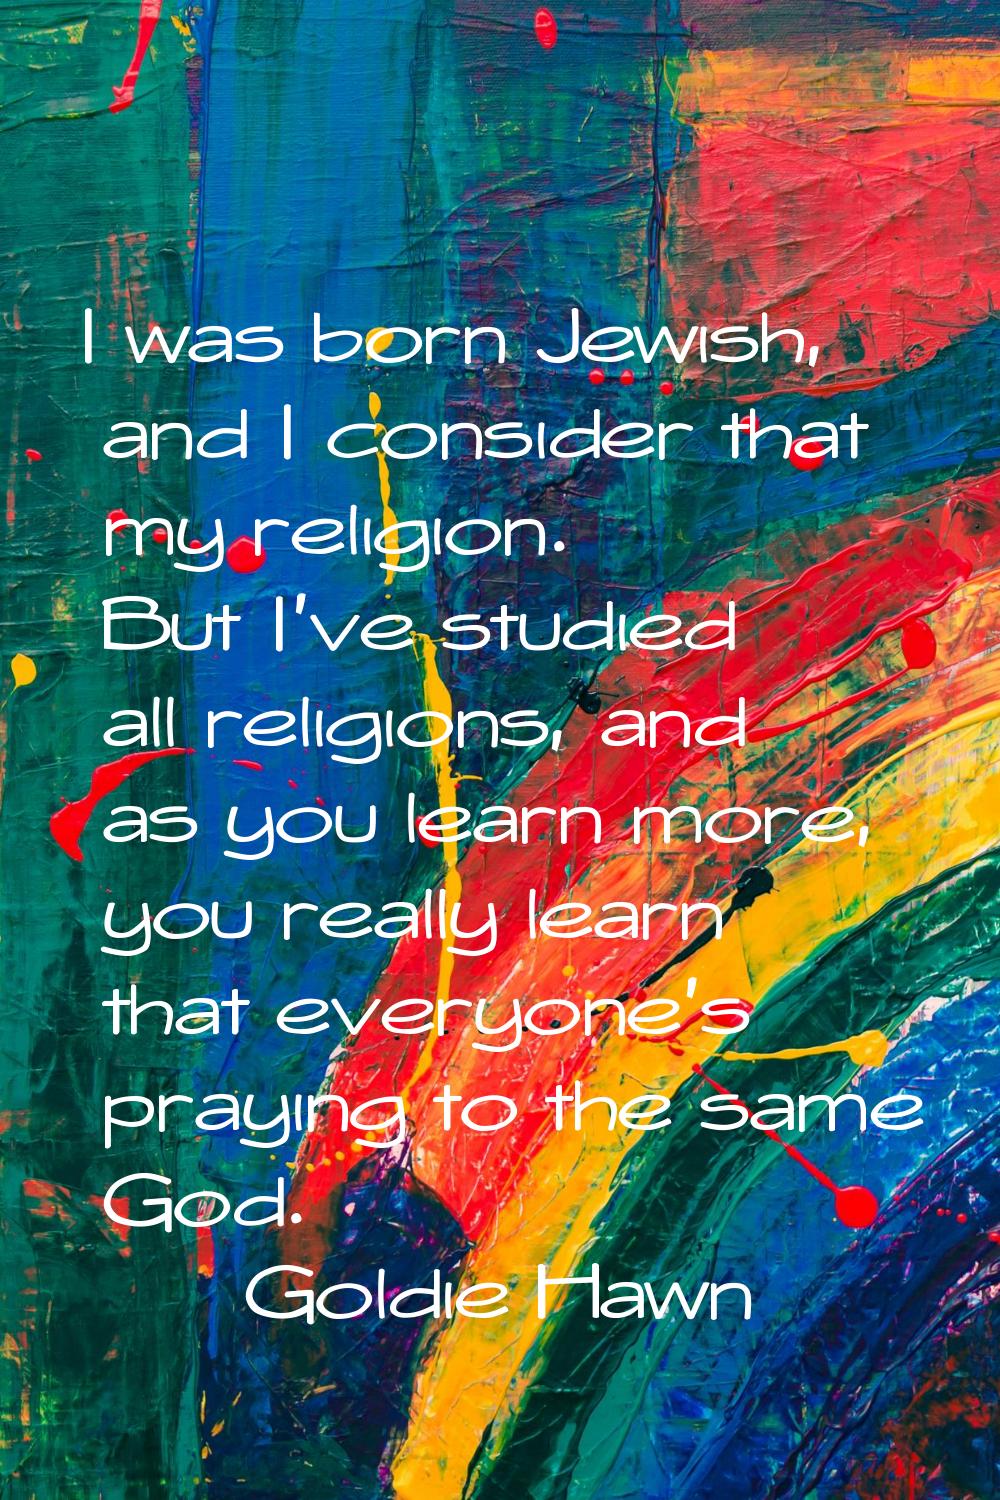 I was born Jewish, and I consider that my religion. But I've studied all religions, and as you lear